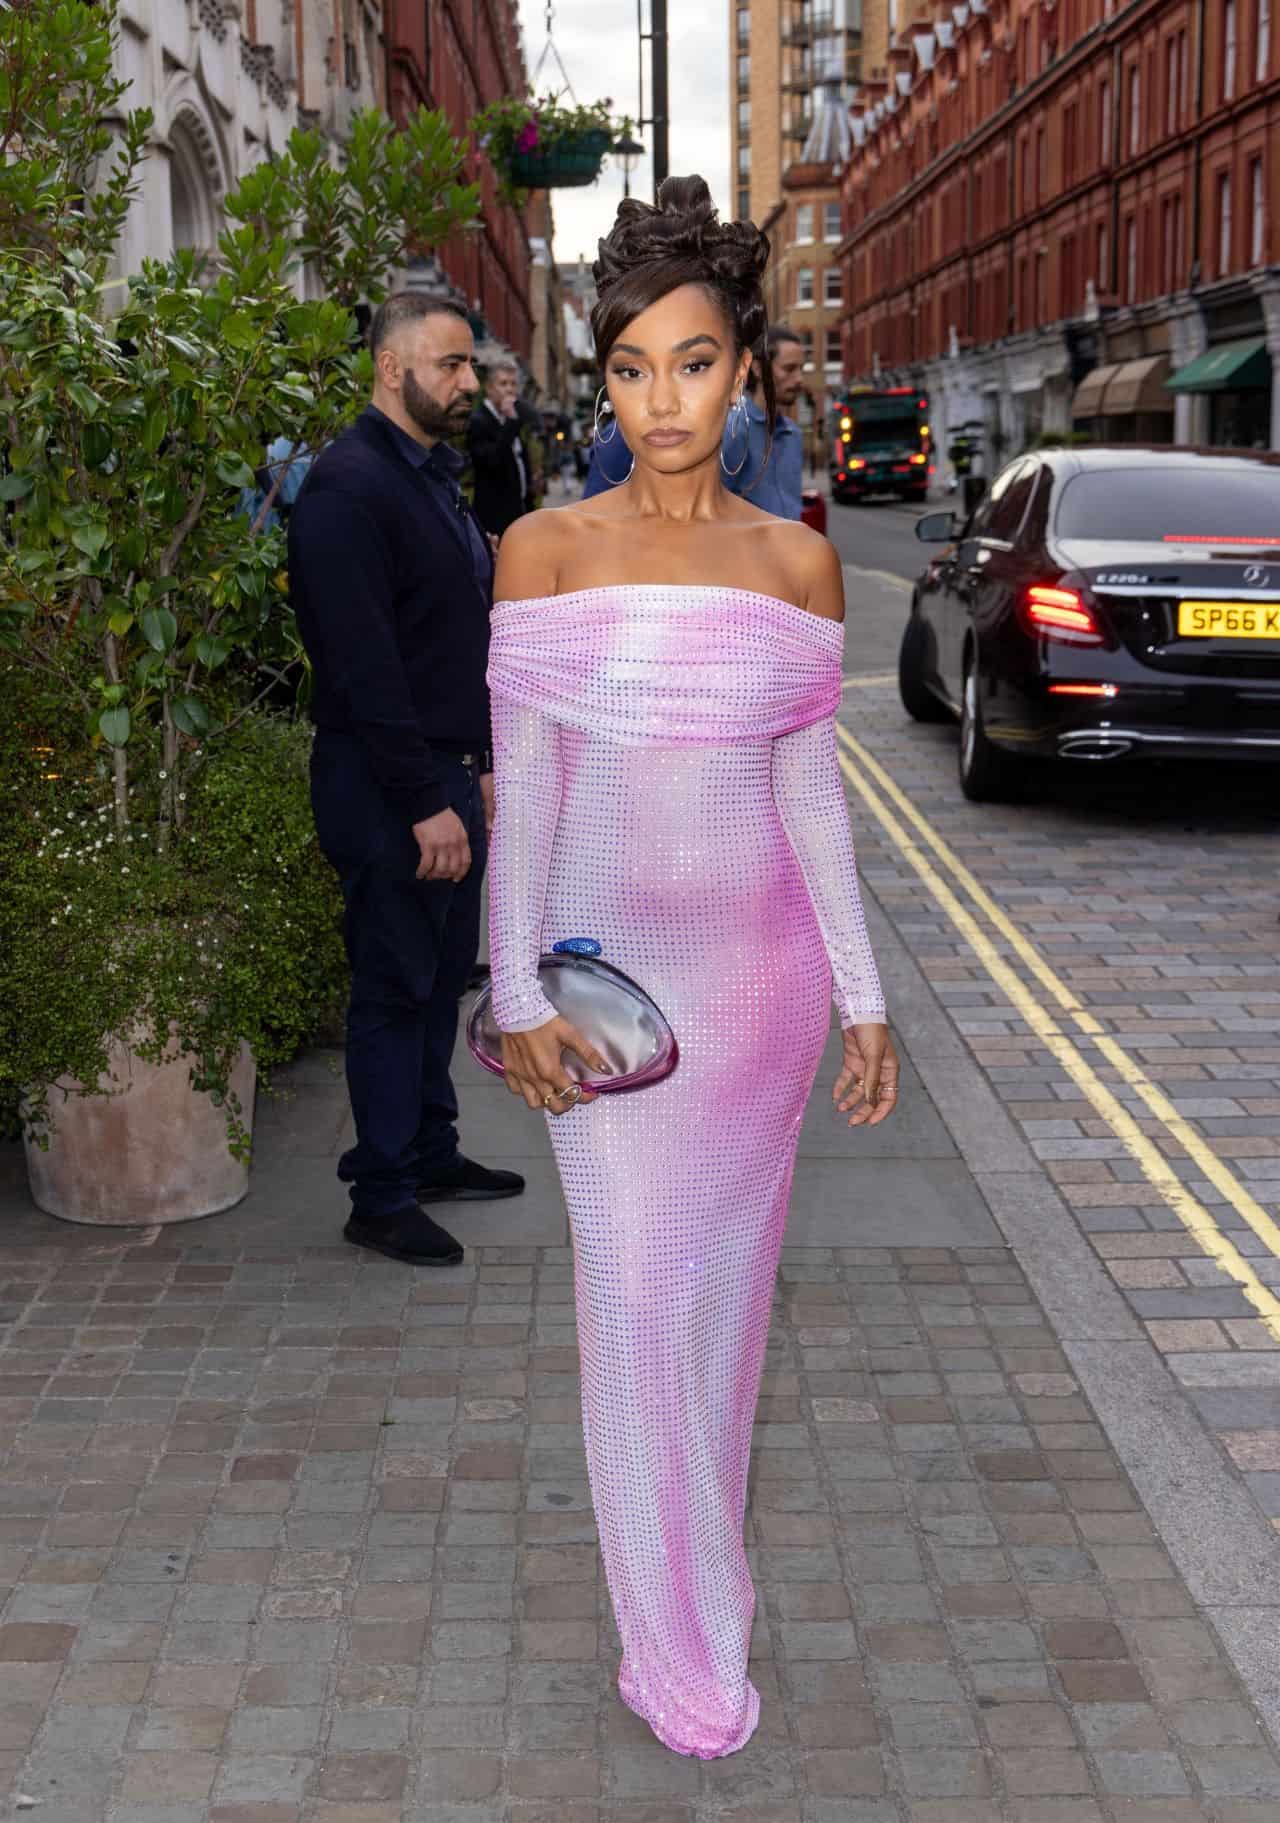 Leigh-Anne Pinnock is an Absolute Vision of Beauty at British Vogue Party